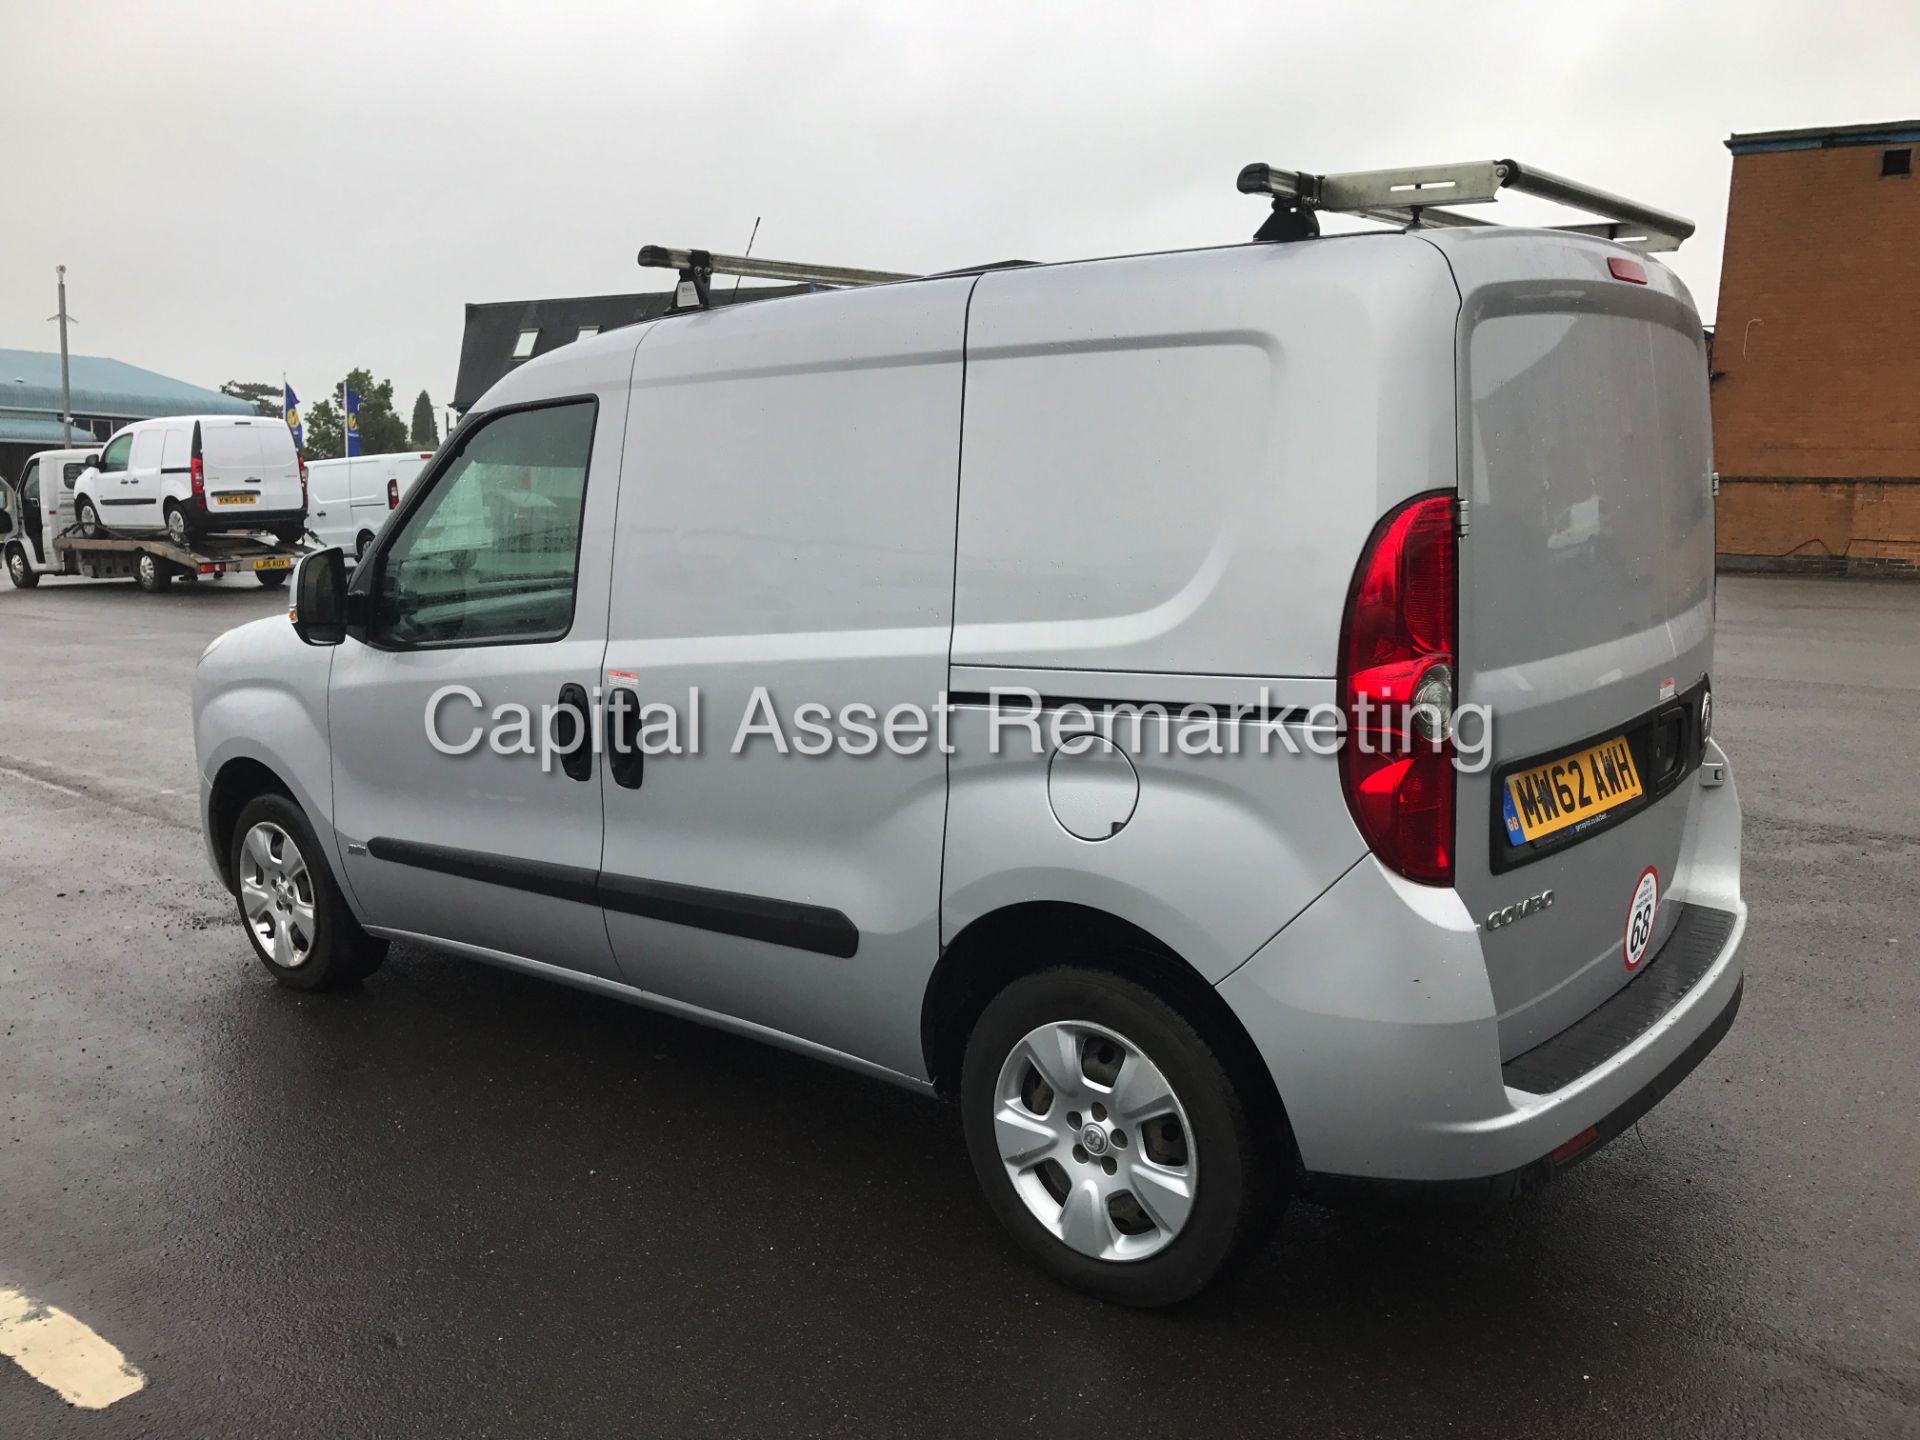 On Sale VAUXHALL COMBO 1.3CDTI "SPORTIVE - 90BHP" 1 OWNER (2013 MODEL) AIR CON - ELEC PACK - Wow!!!! - Image 7 of 15